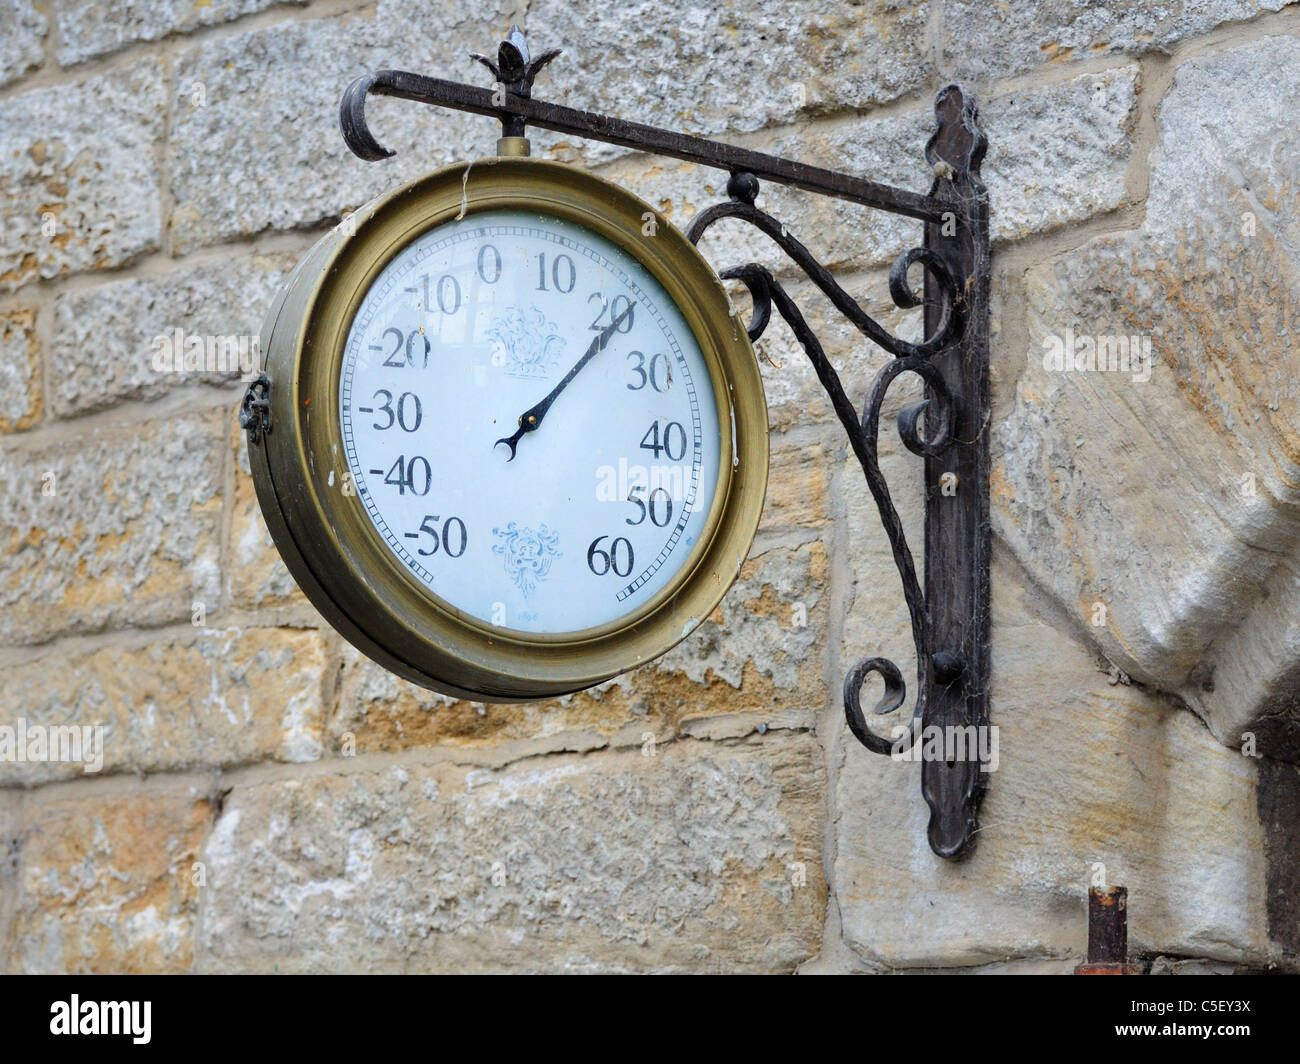 https://c8.alamy.com/comp/C5EY3X/large-round-analog-thermometer-hanging-from-bracket-on-outside-wall-C5EY3X.jpg